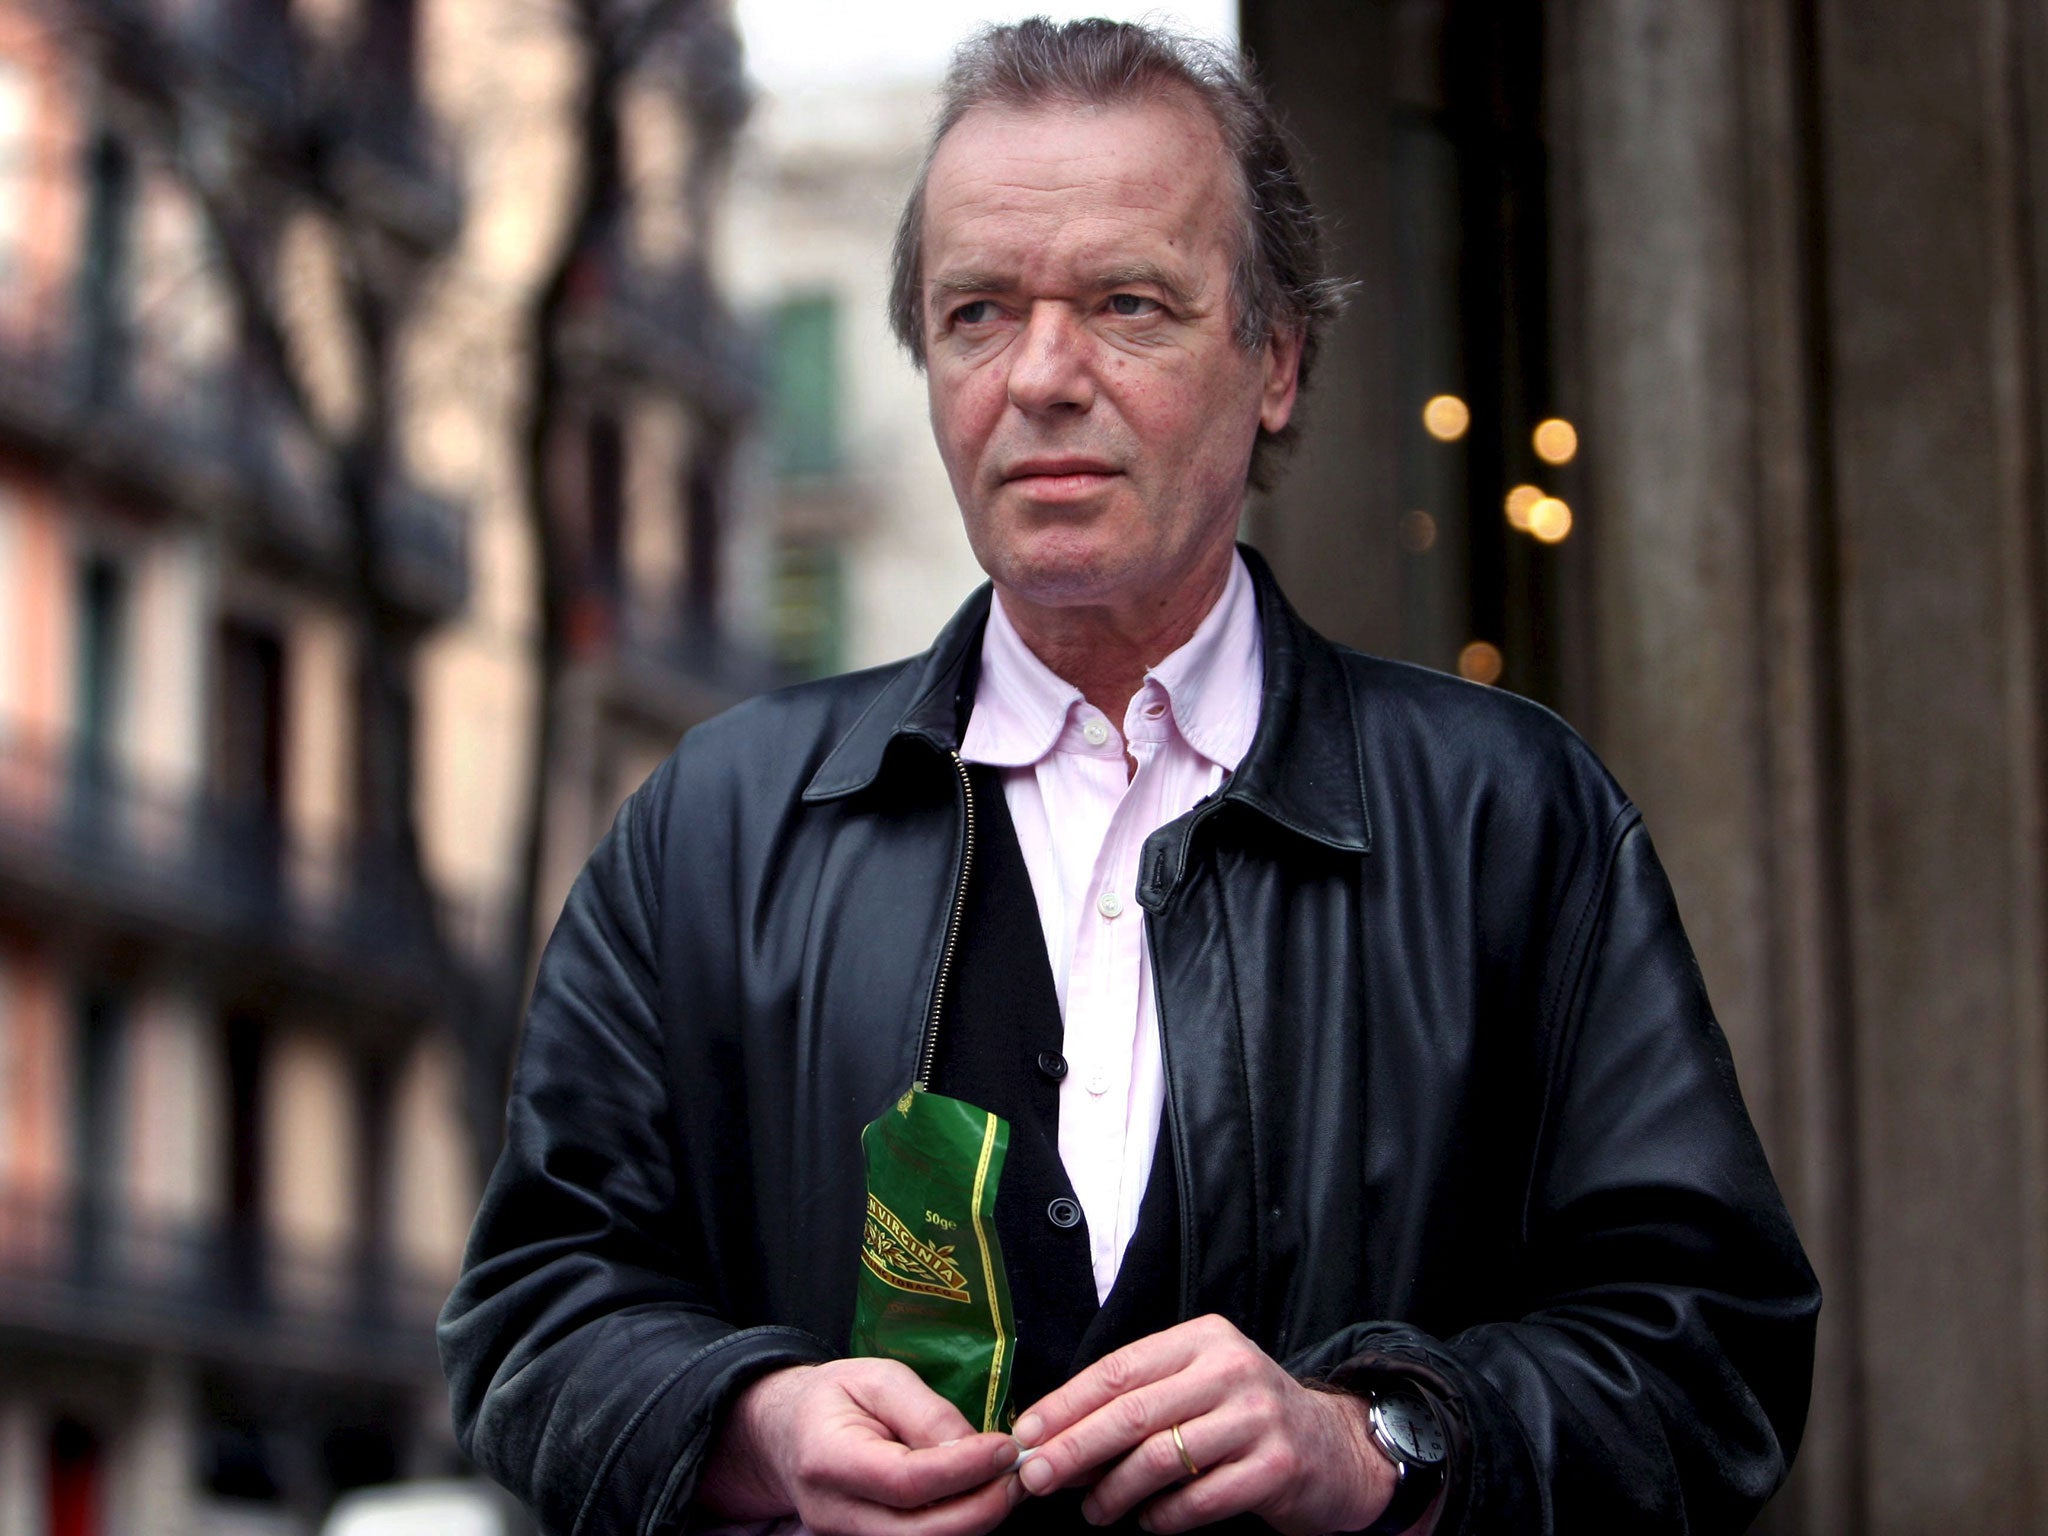 Writer Martin Amis has indicated that he may return to Britain